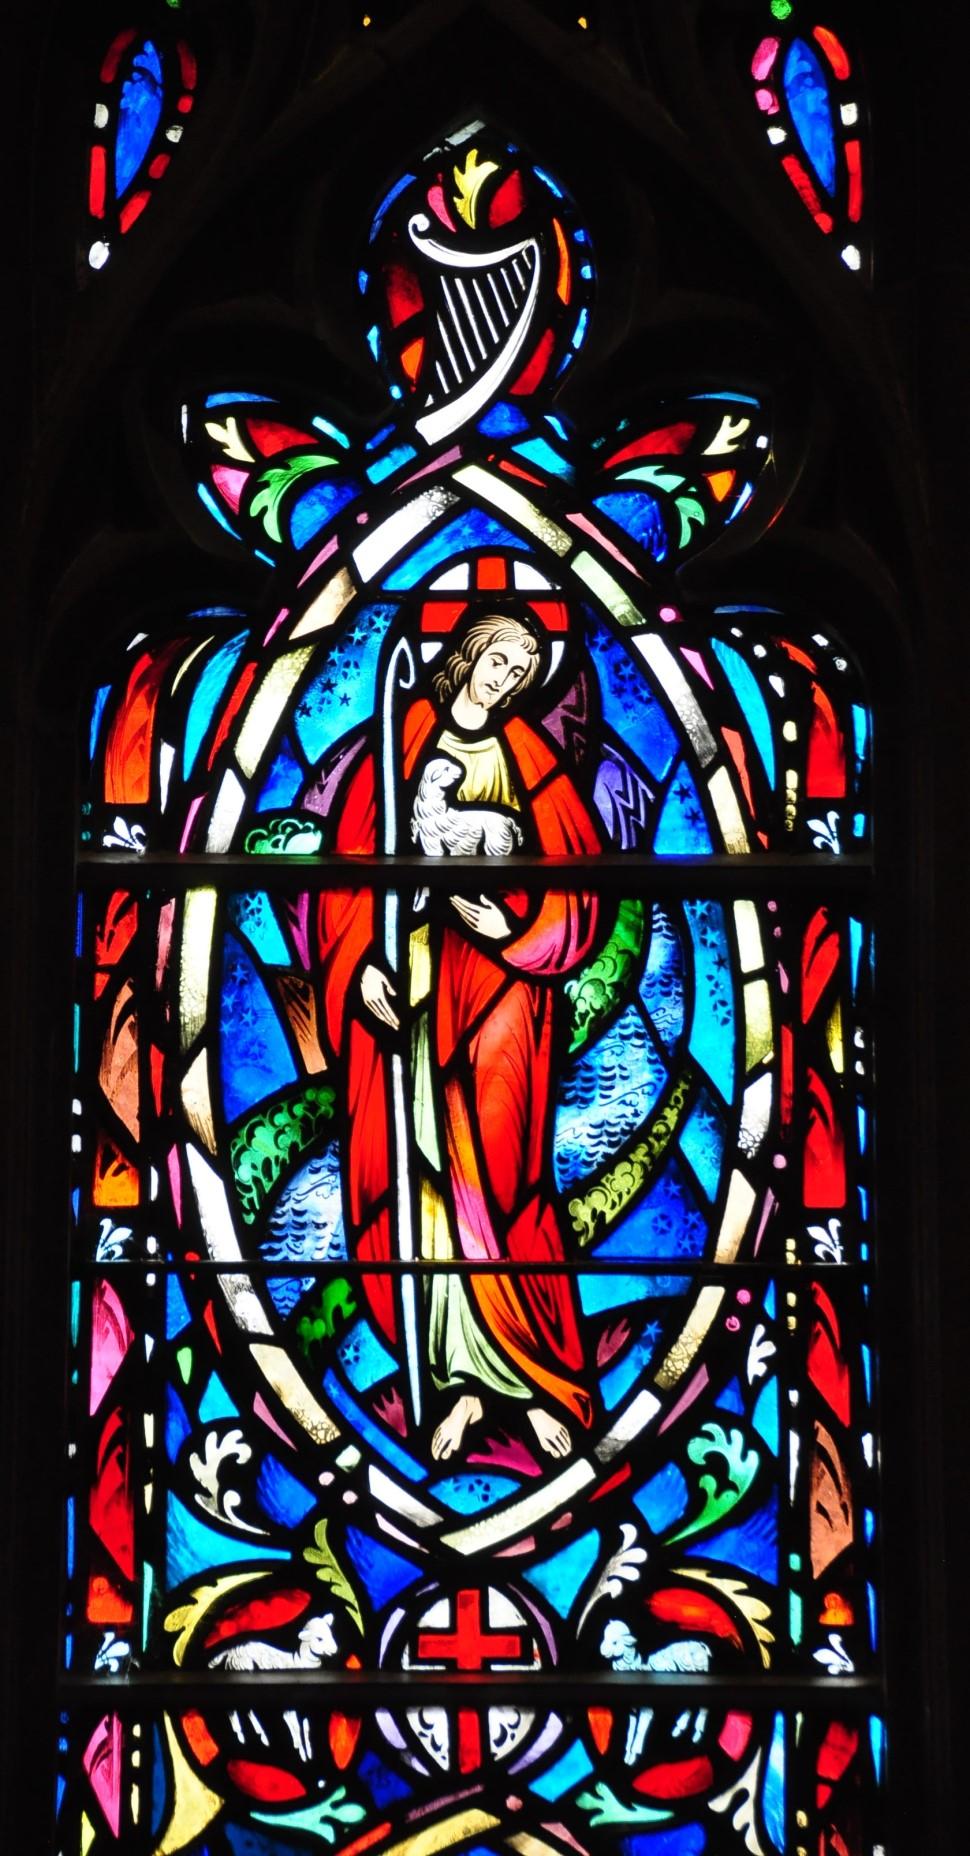 The Poetry Window: The middle aisle window on the left suggests the Poetry of the Bible. The lower medallion symbolizes the return of the prodigal son who kneels before the forgiving father.